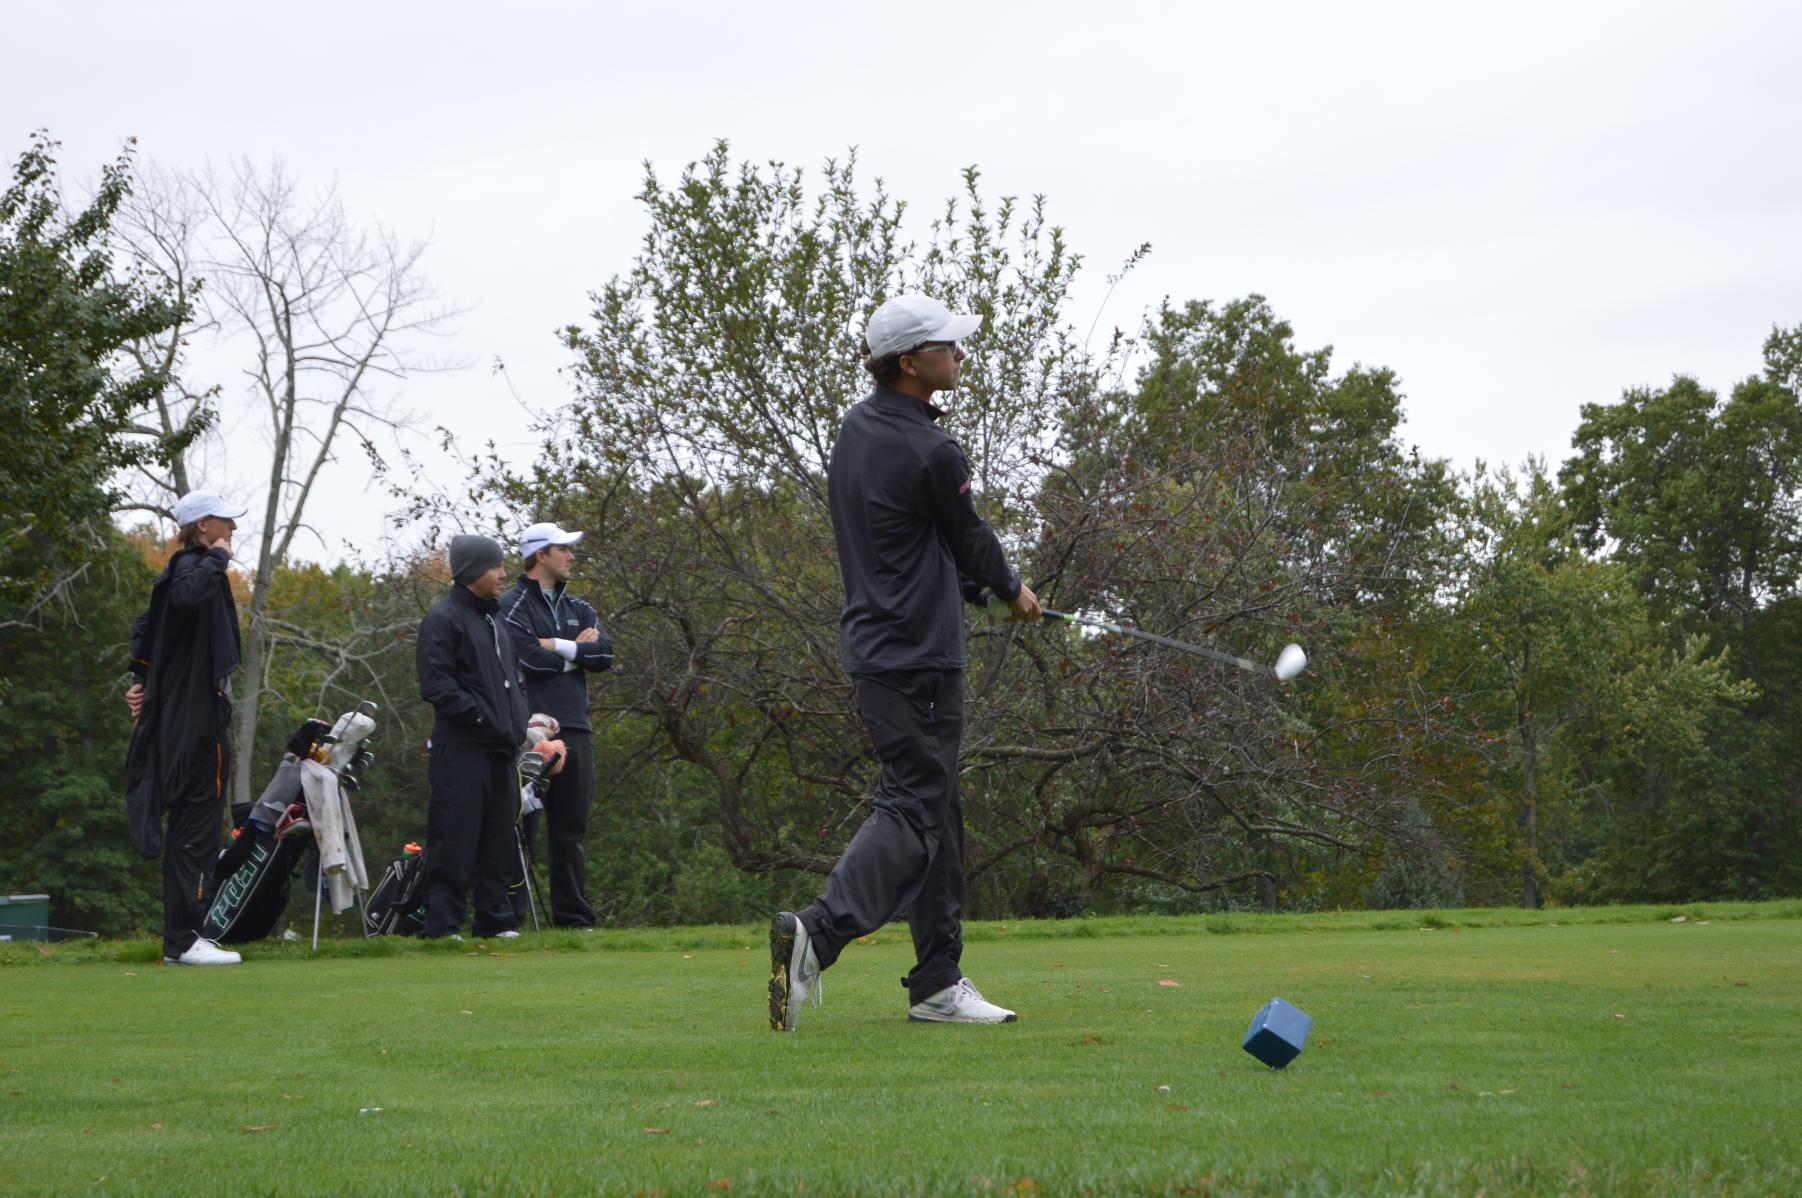 MEN'S GOLF IN SEVENTH PLACE AFTER ROUND ONE OF PENMEN FALL INVITATIONAL